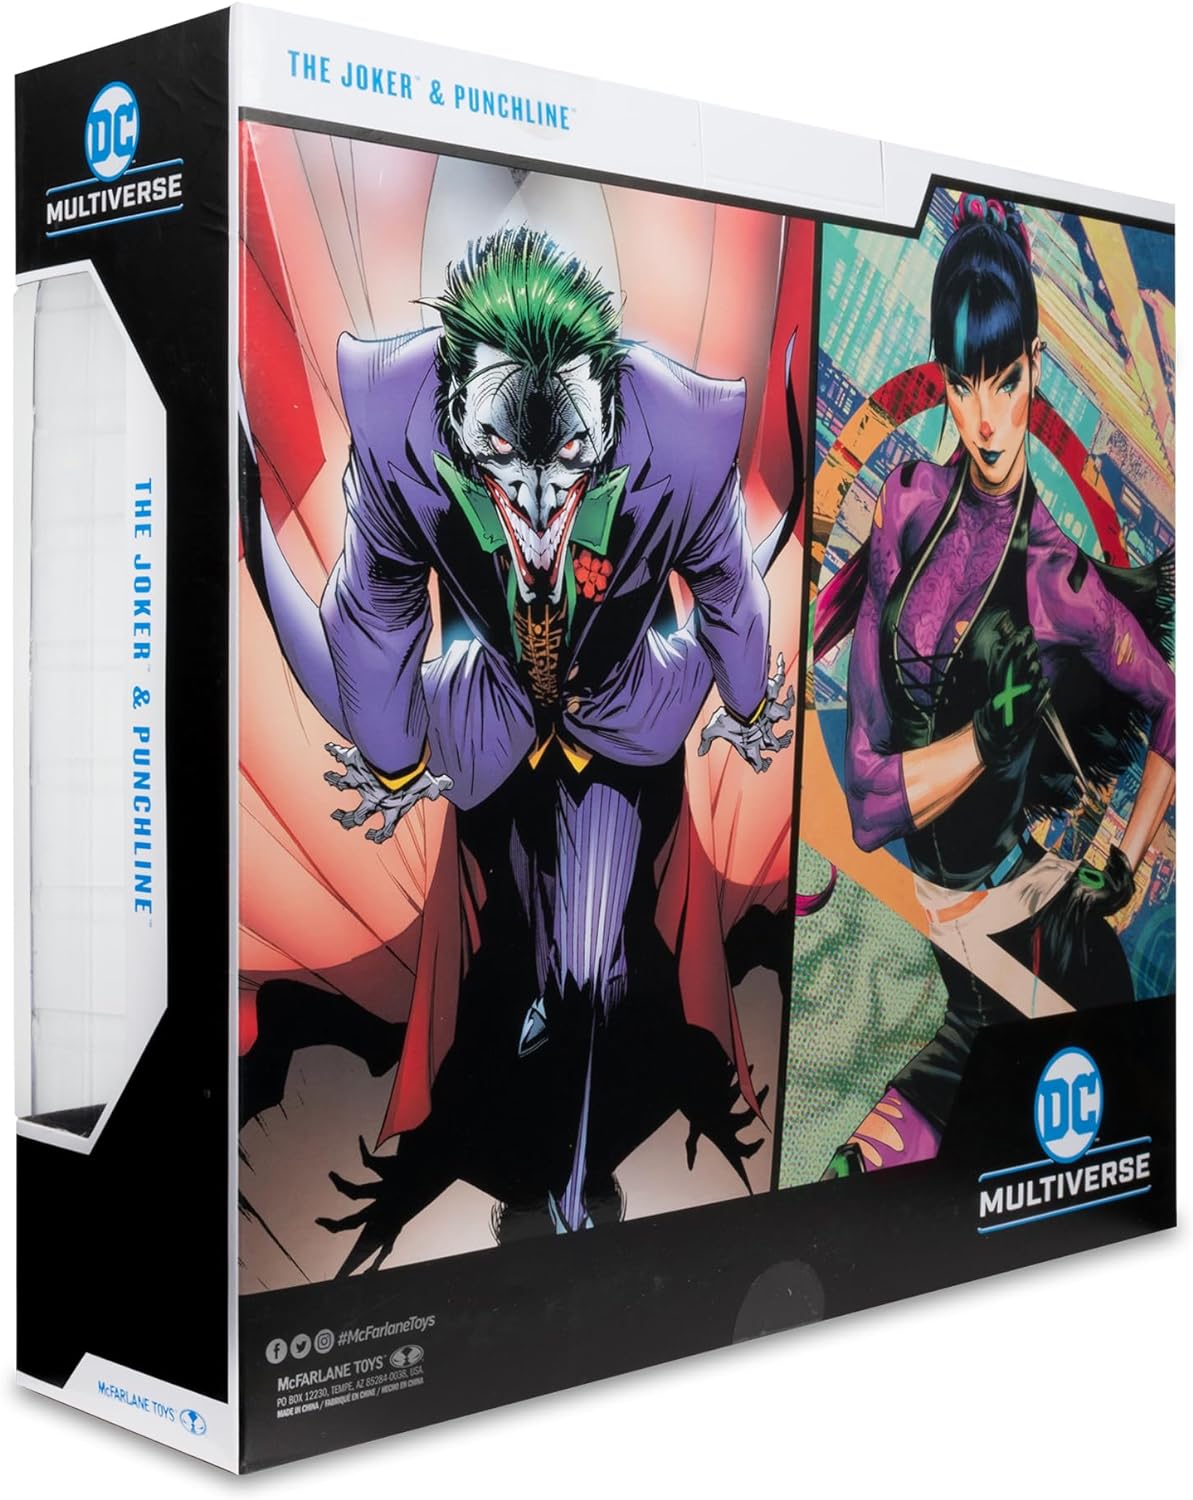 Quick Sellout of McFarlane Toys' Joker & Punchline 2-Pack